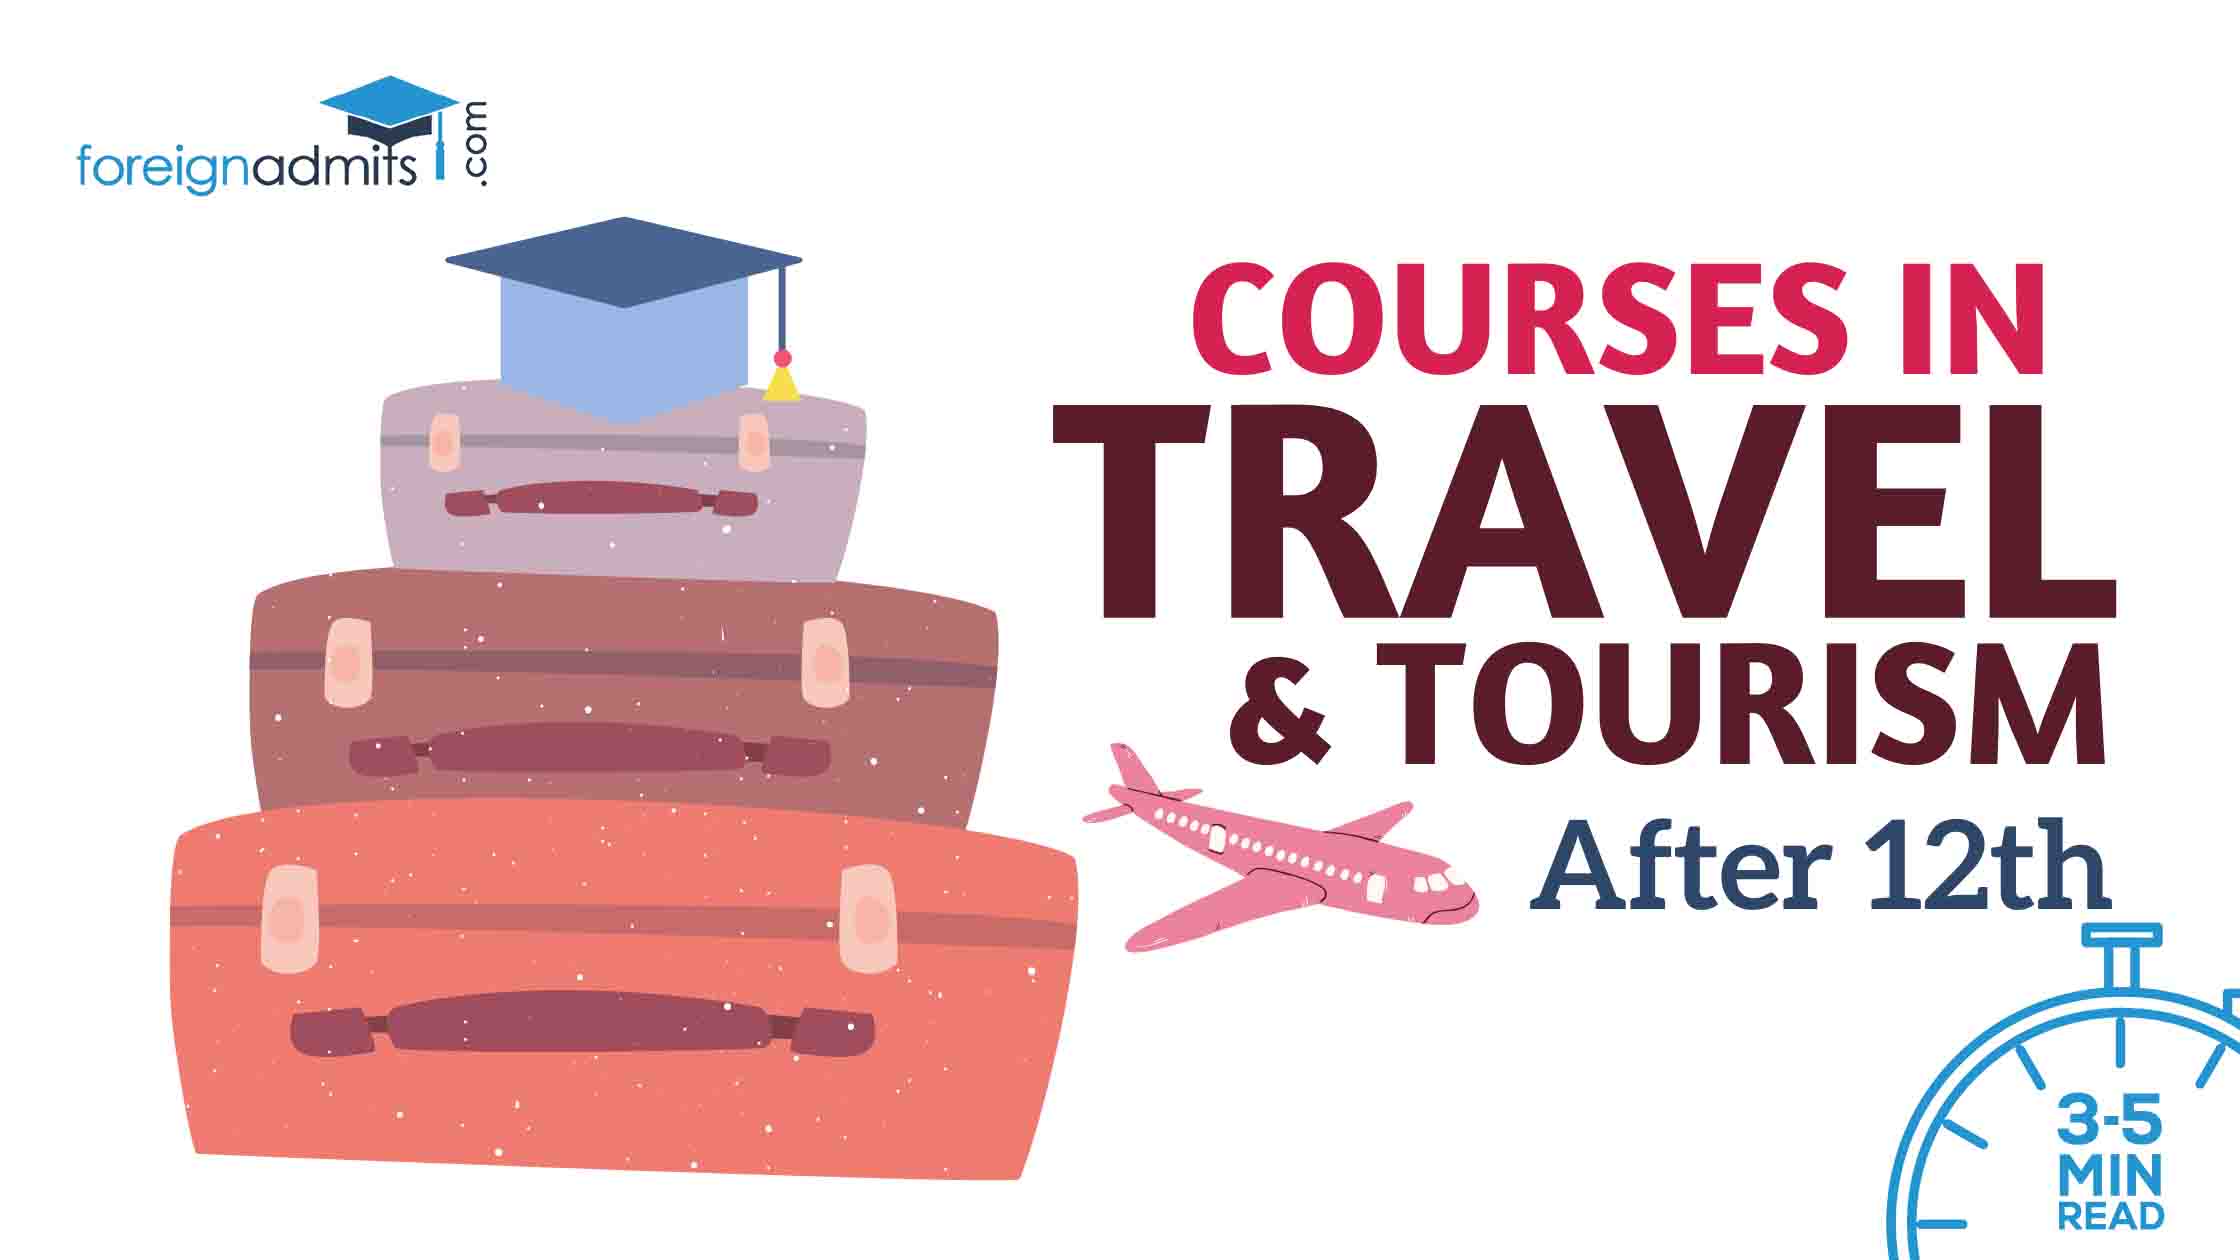 Courses in Travel and Tourism after 12th